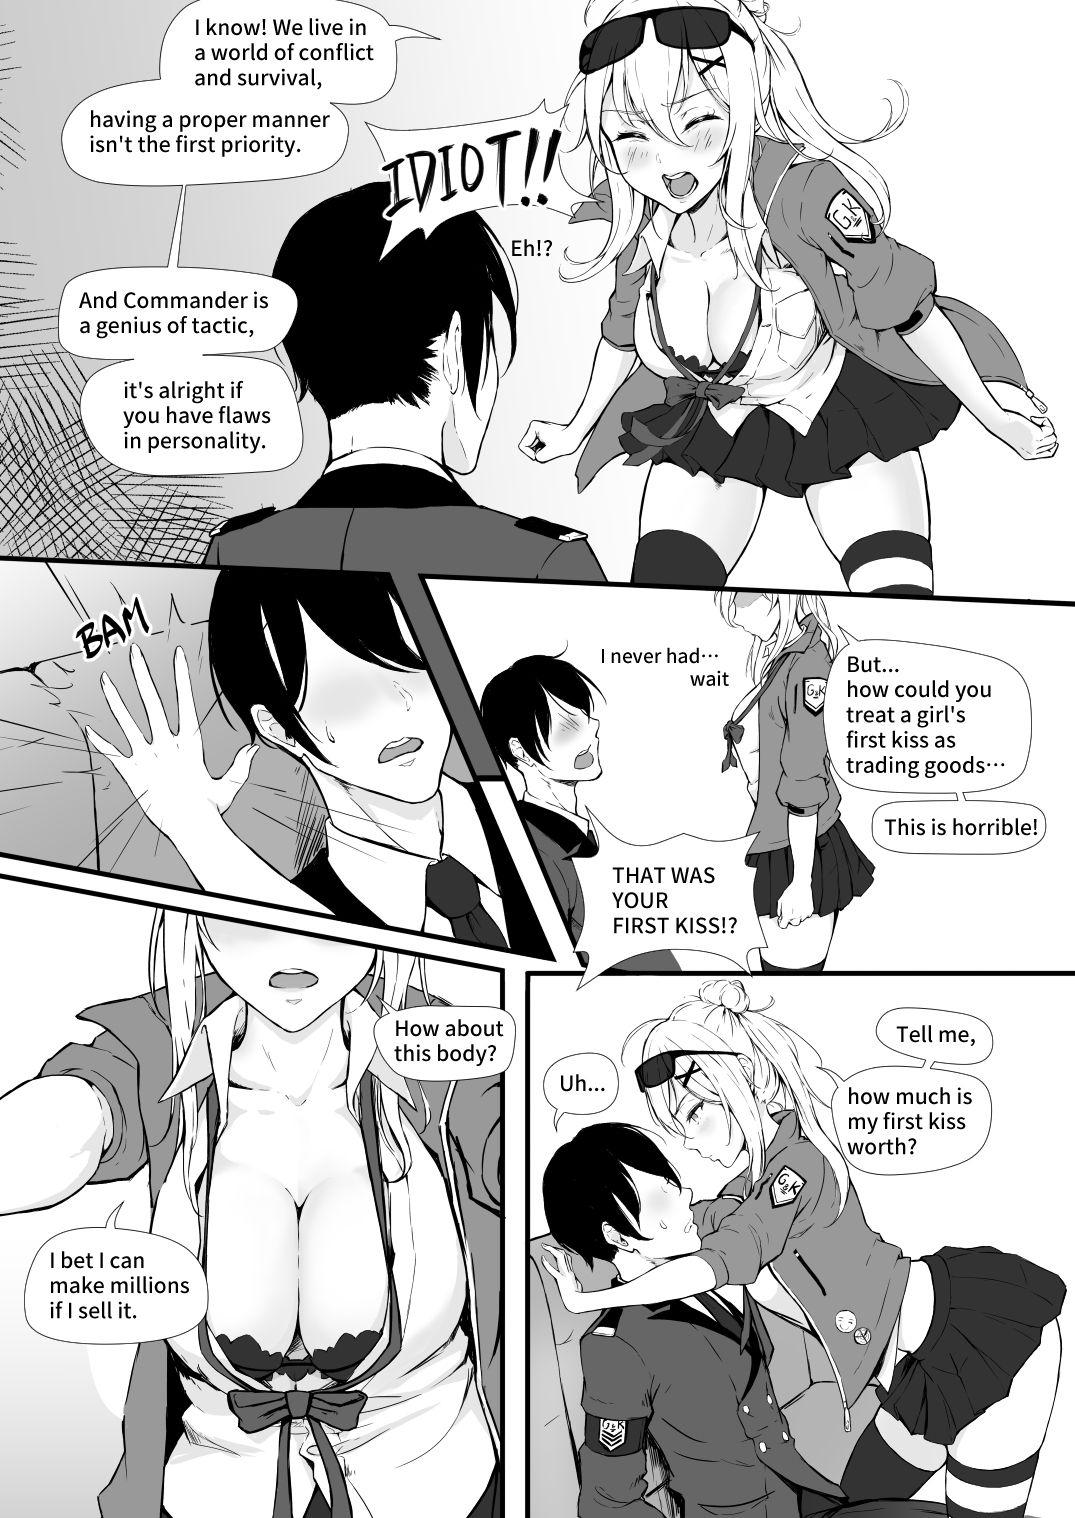 Sex How Many Diamonds a Kiss Worth? - Girls frontline Show - Page 9